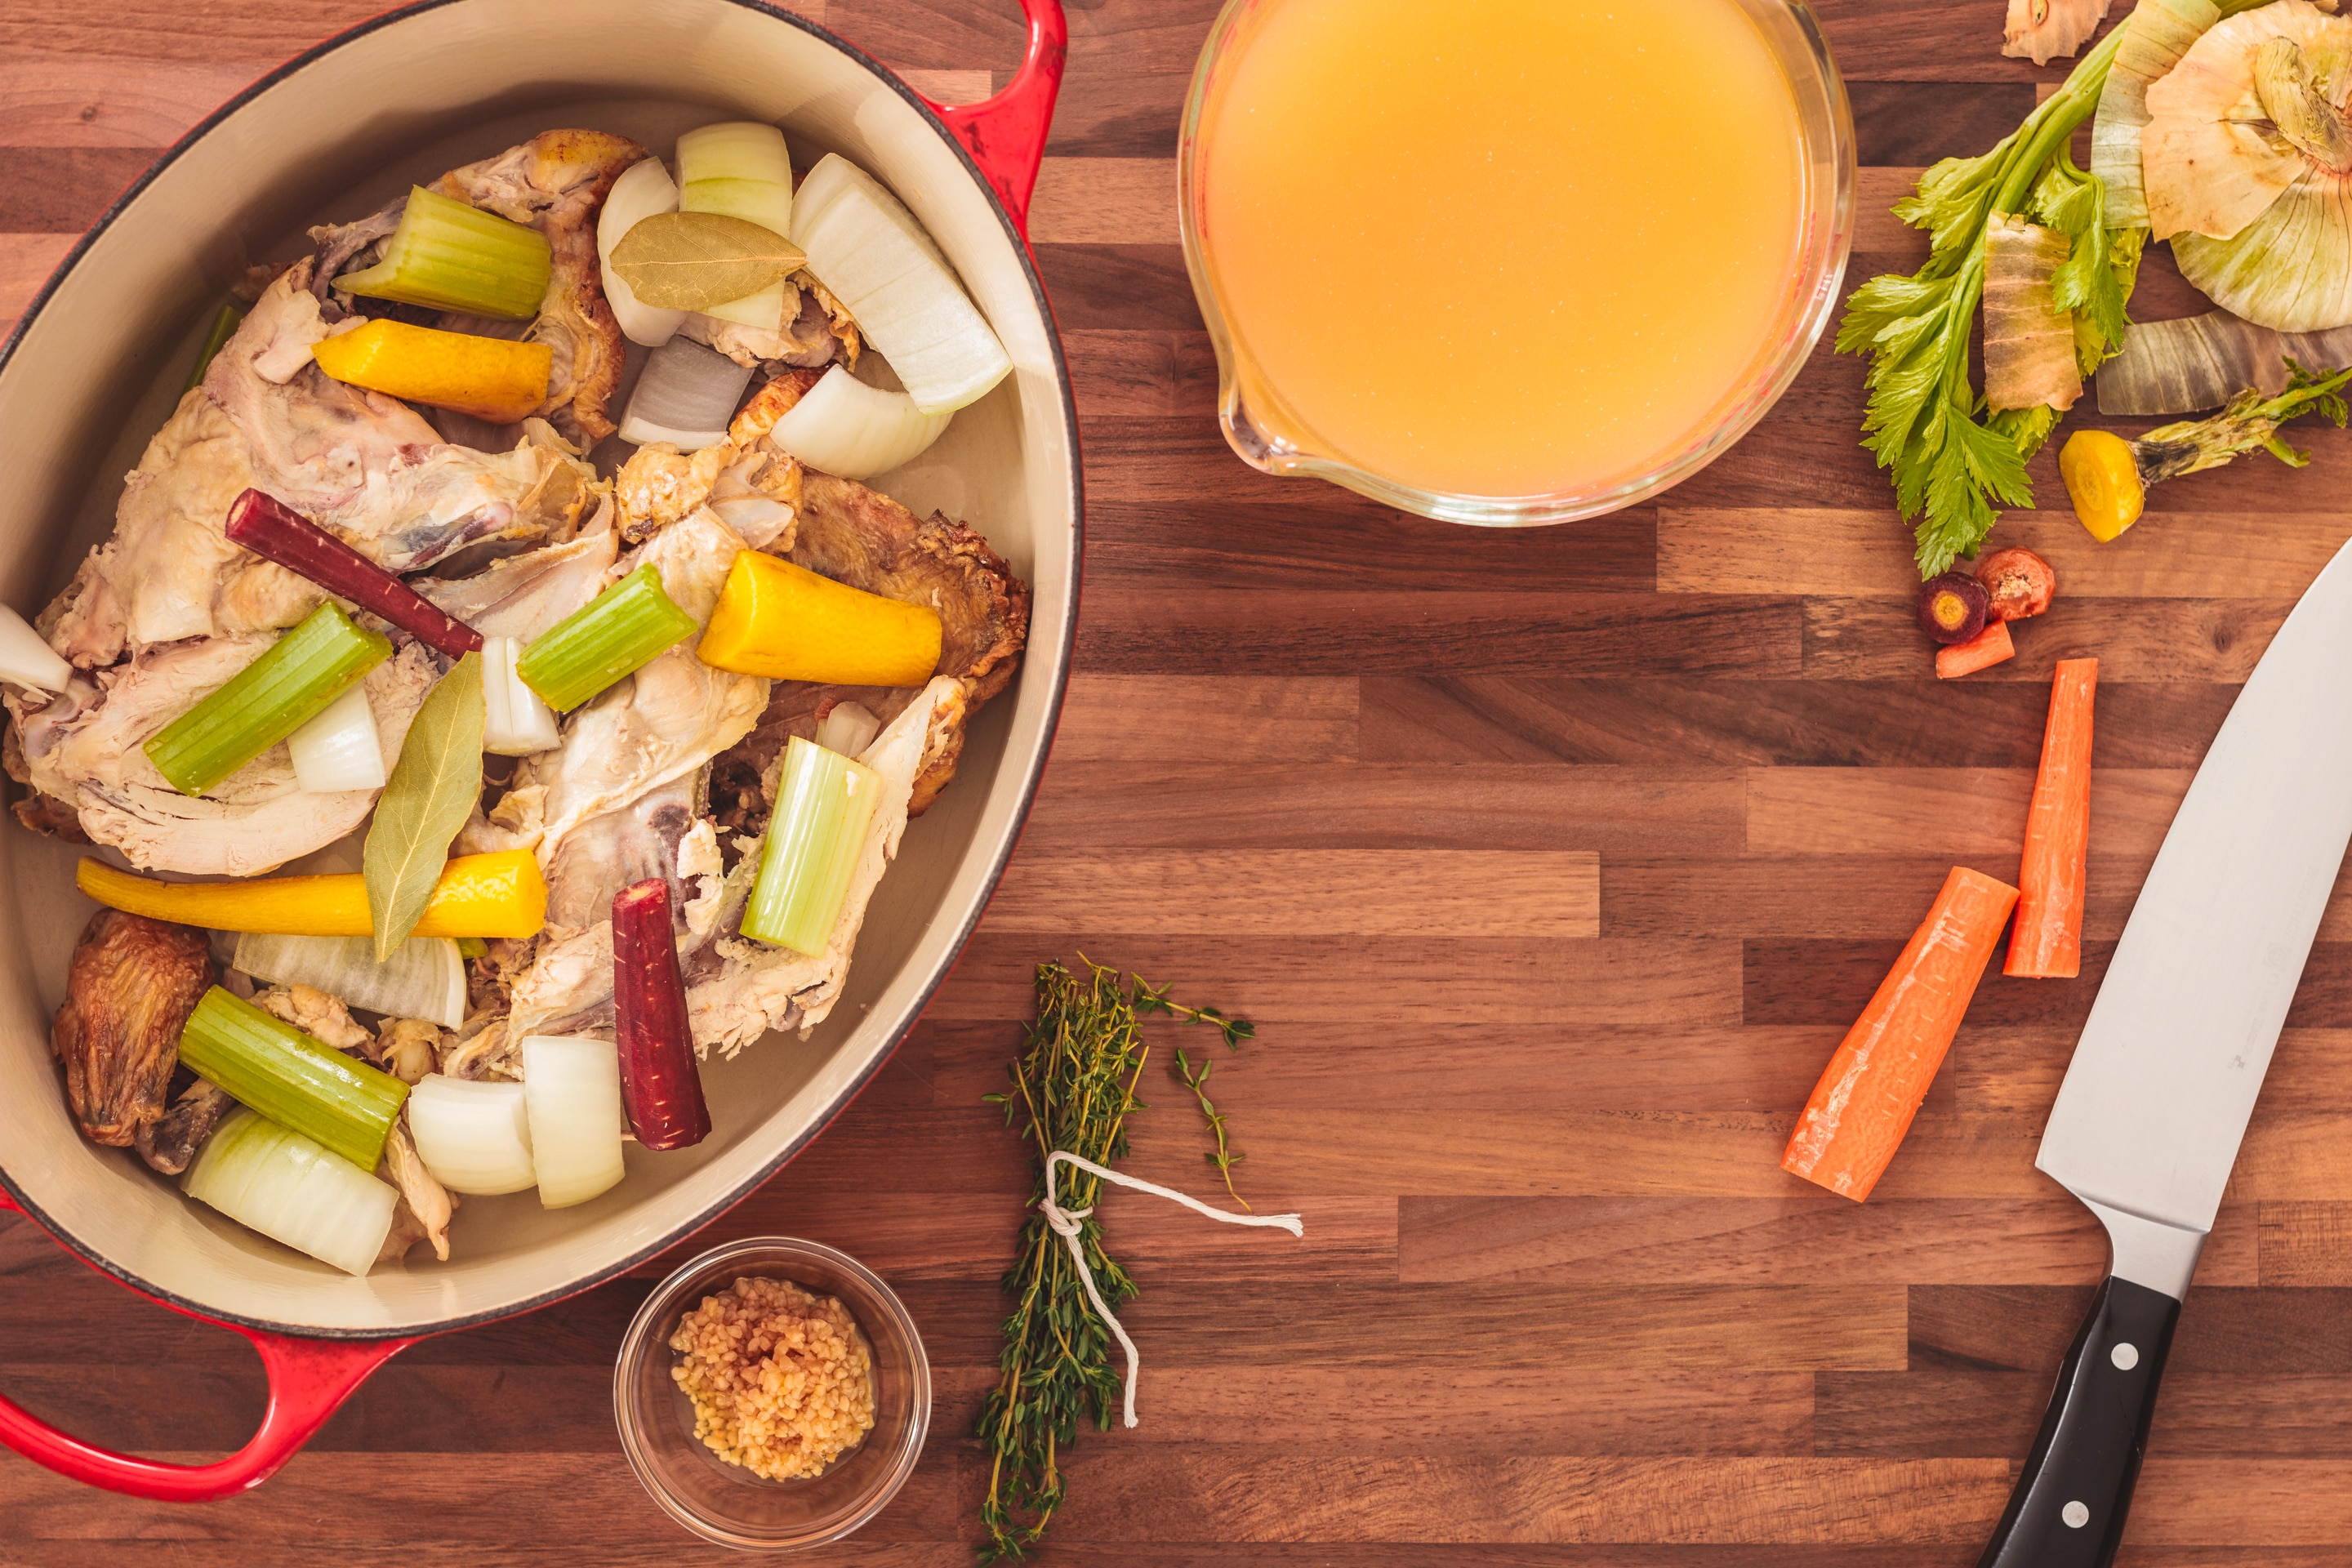 Roasted chicken sits in a pot with chopped celery, carrots, onions, and spices